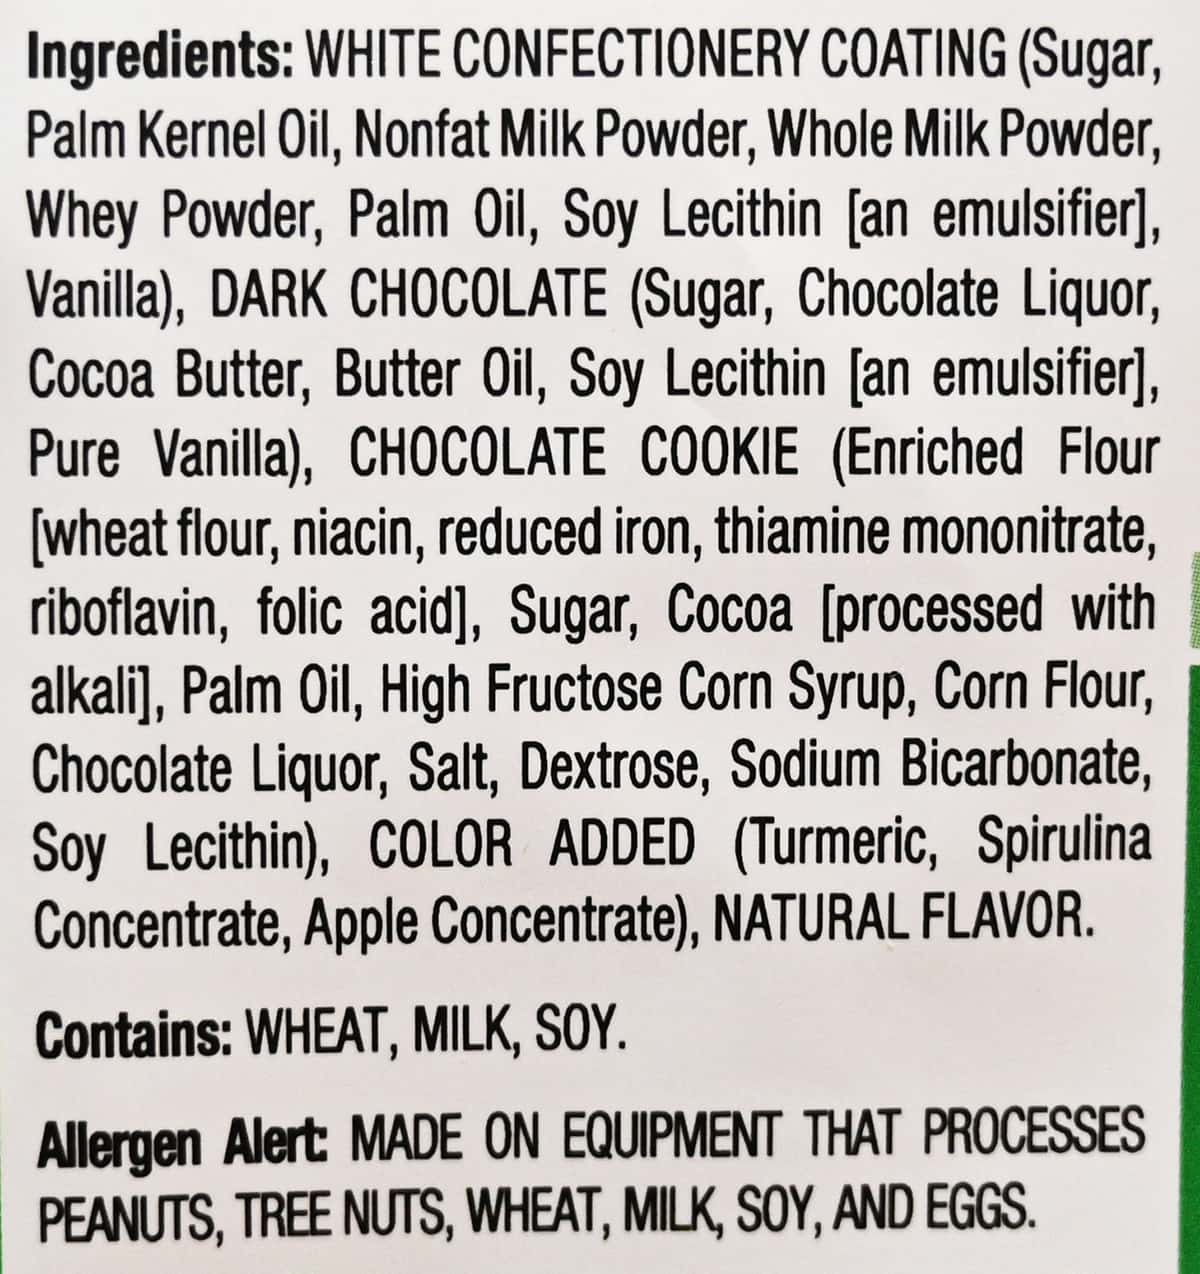 Image of the ingredients list from the package.